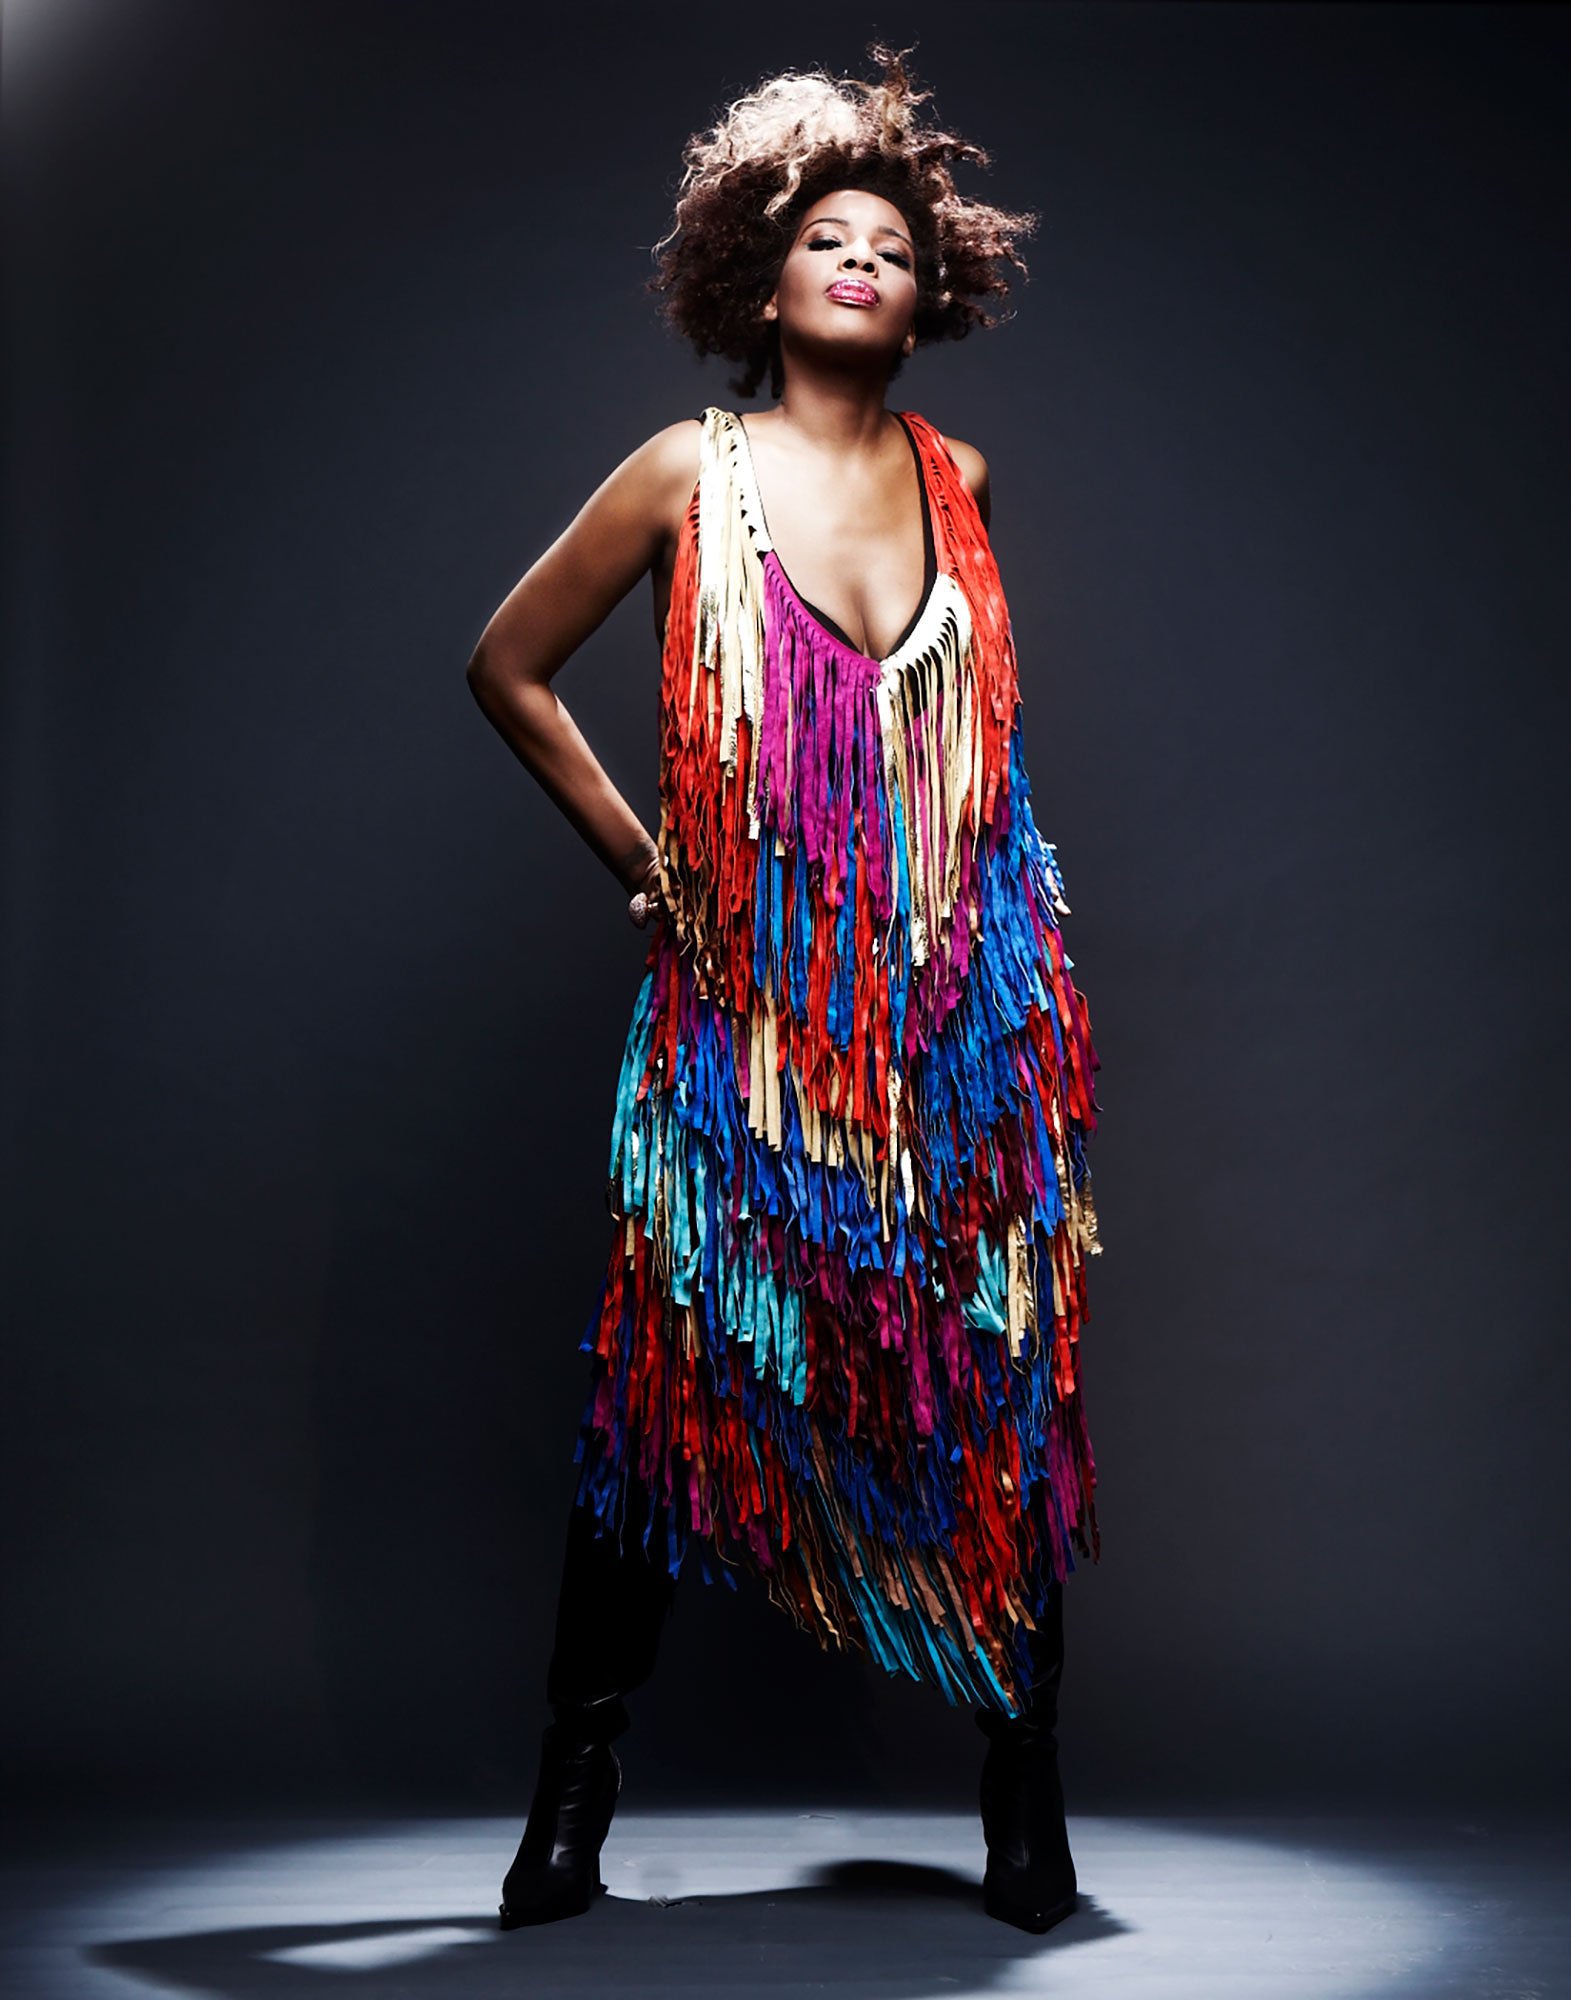 Macy Gray Iphone Wallpapers